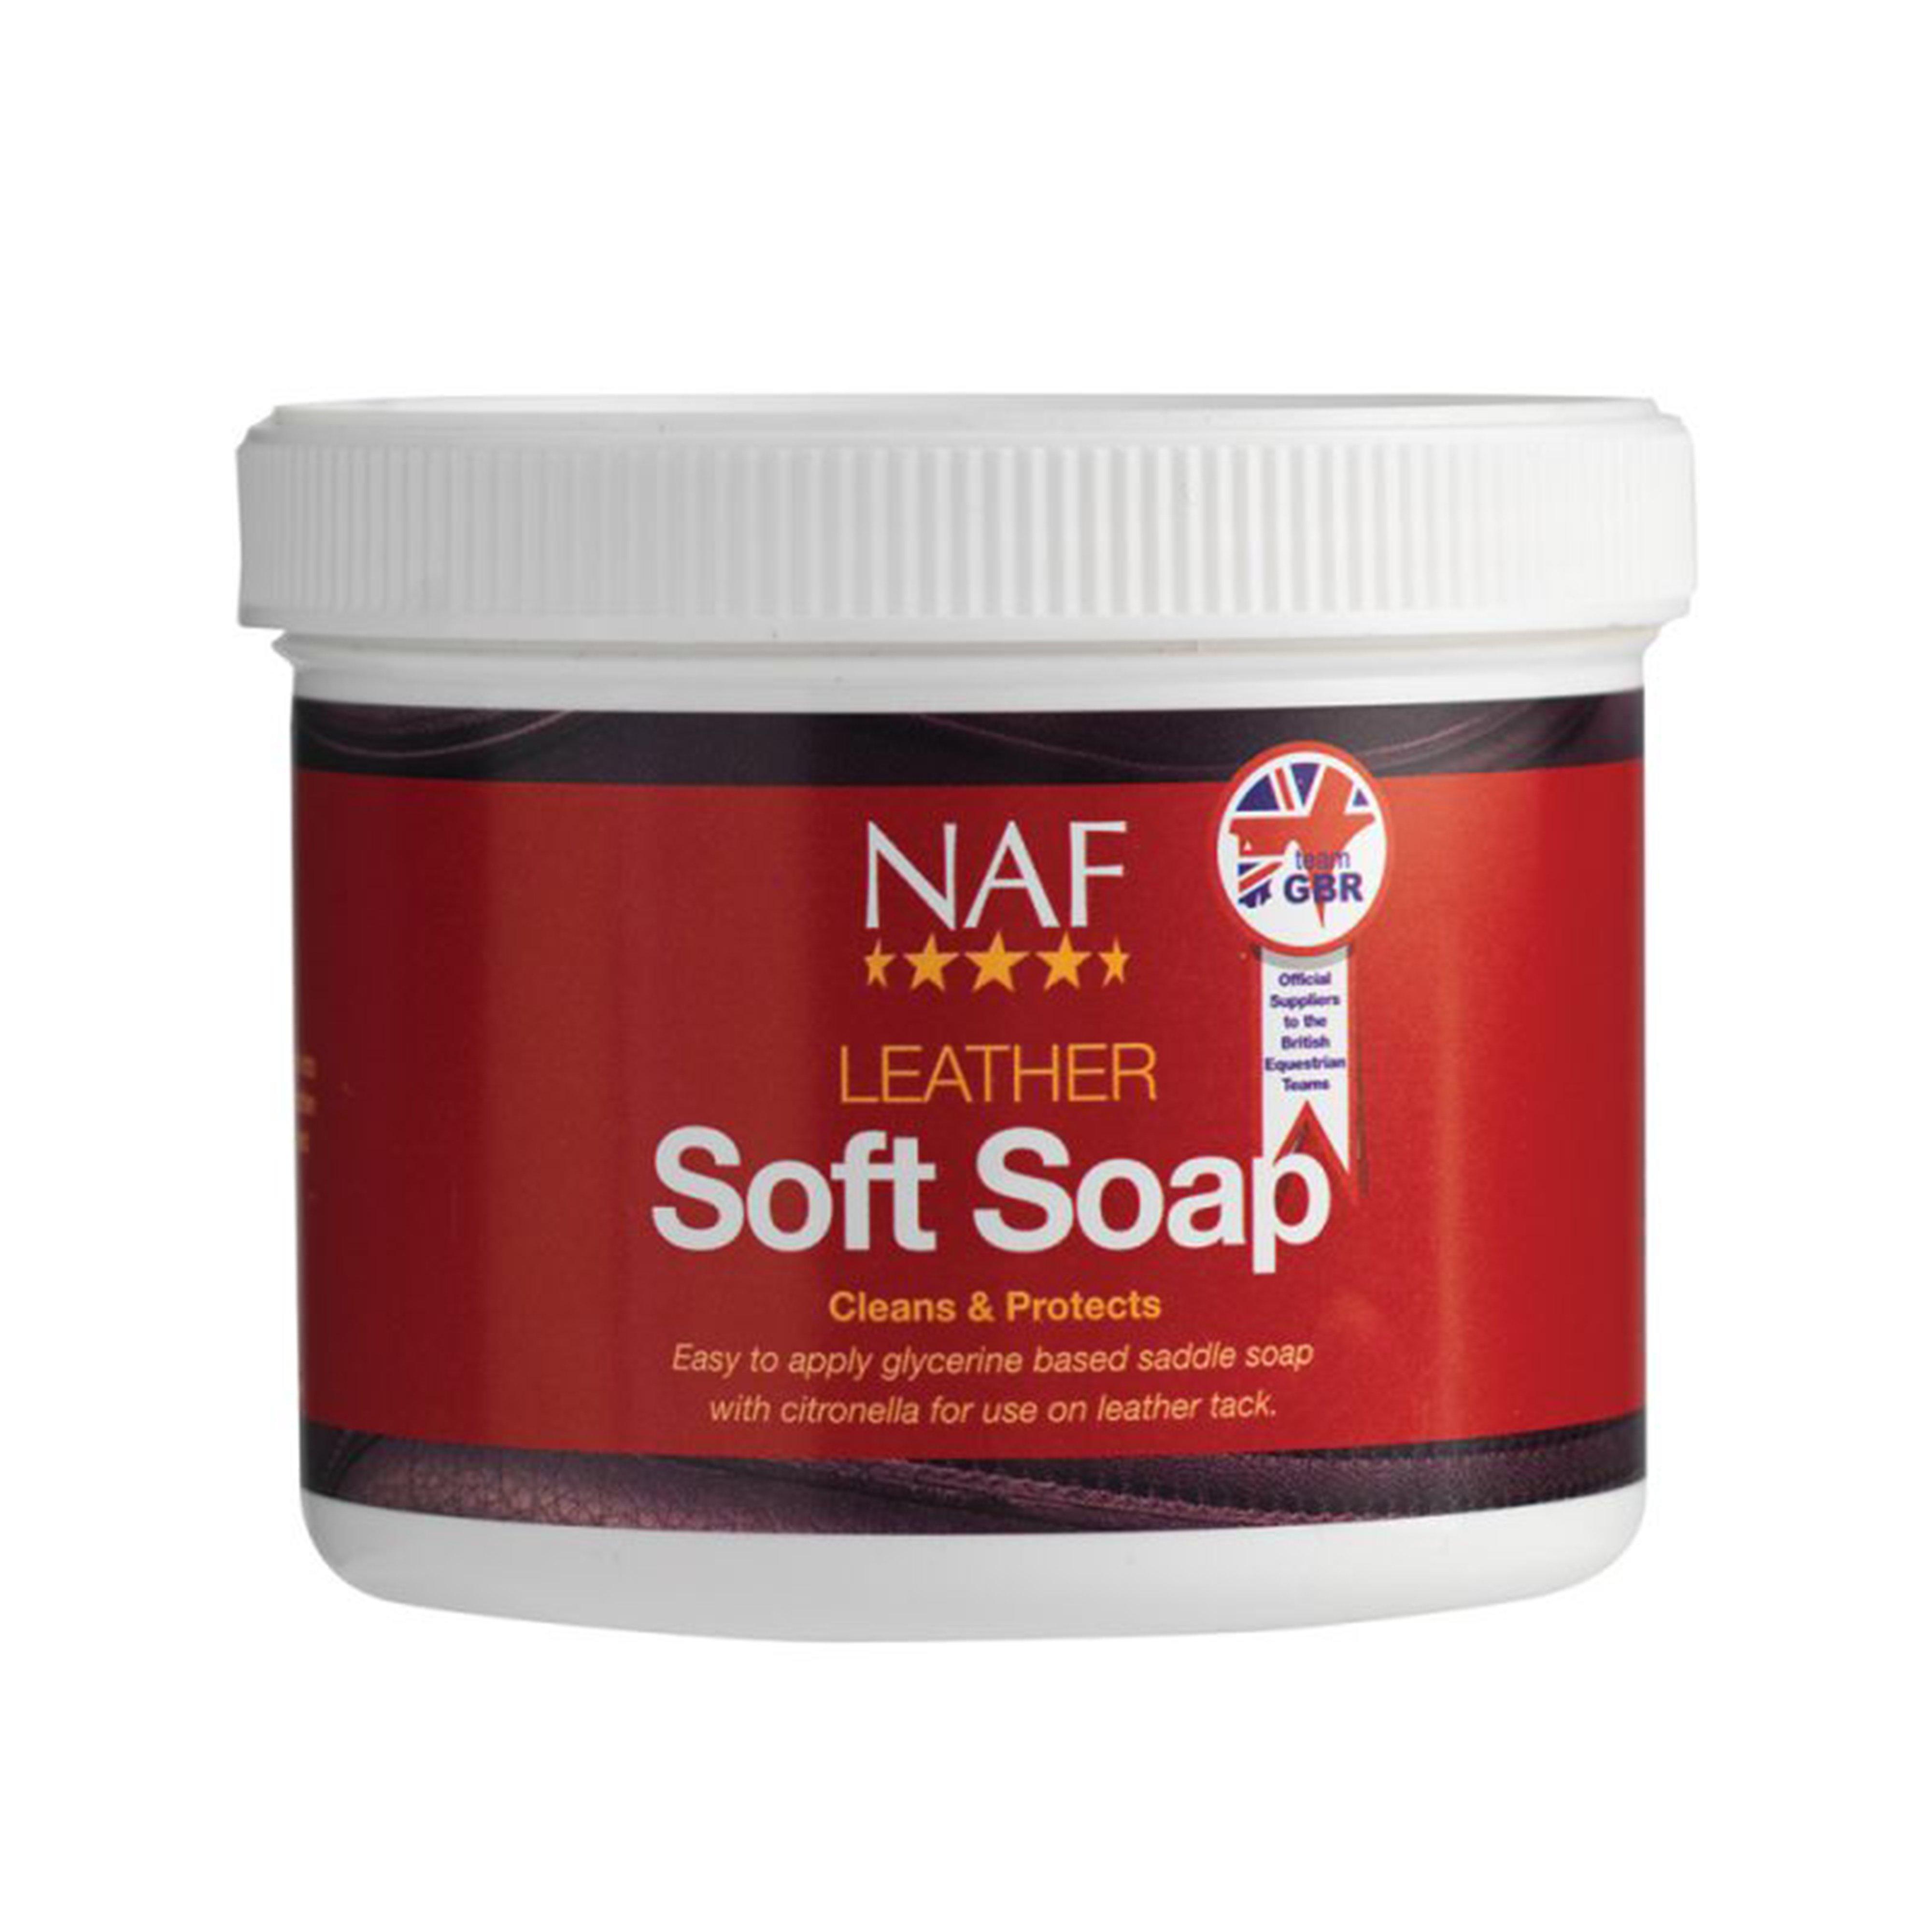 Leather Soft Soap 450g